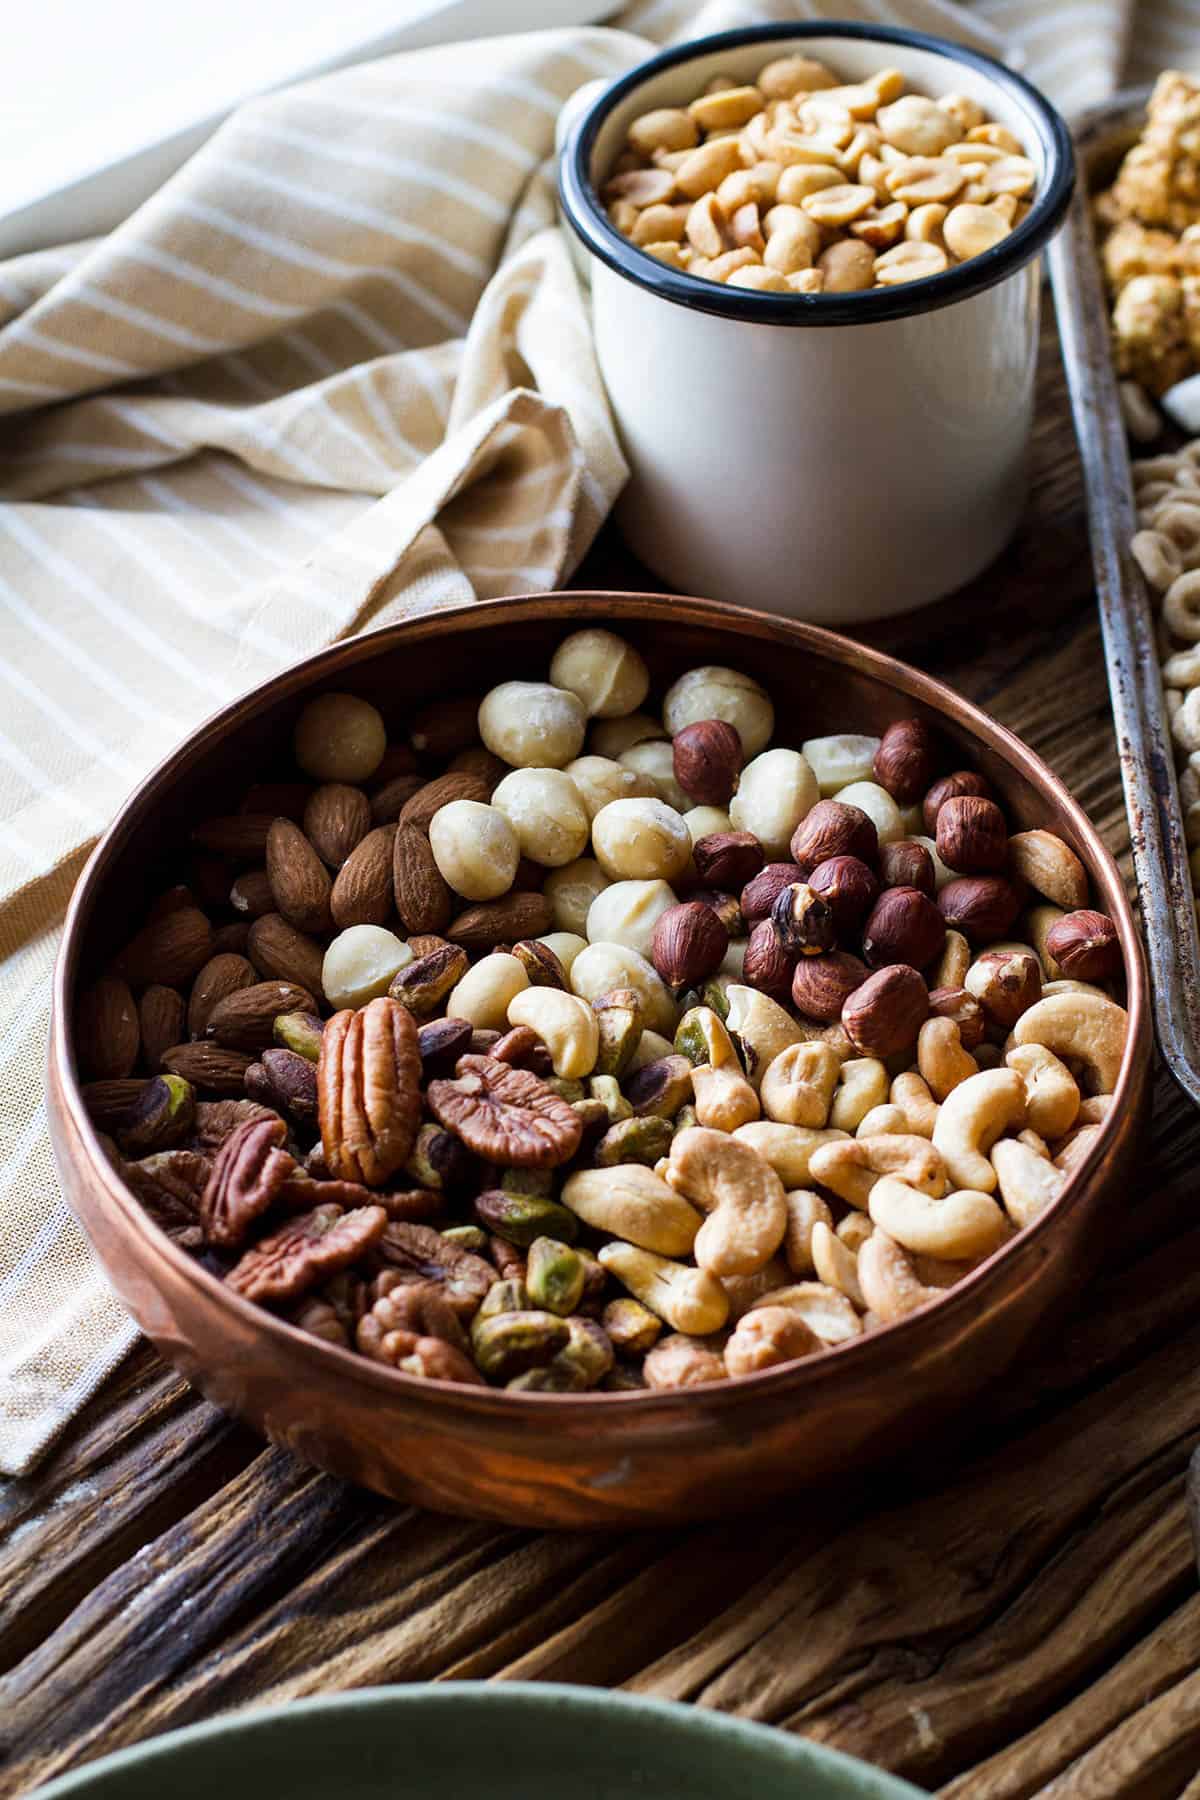 A copper bowl with various nuts.